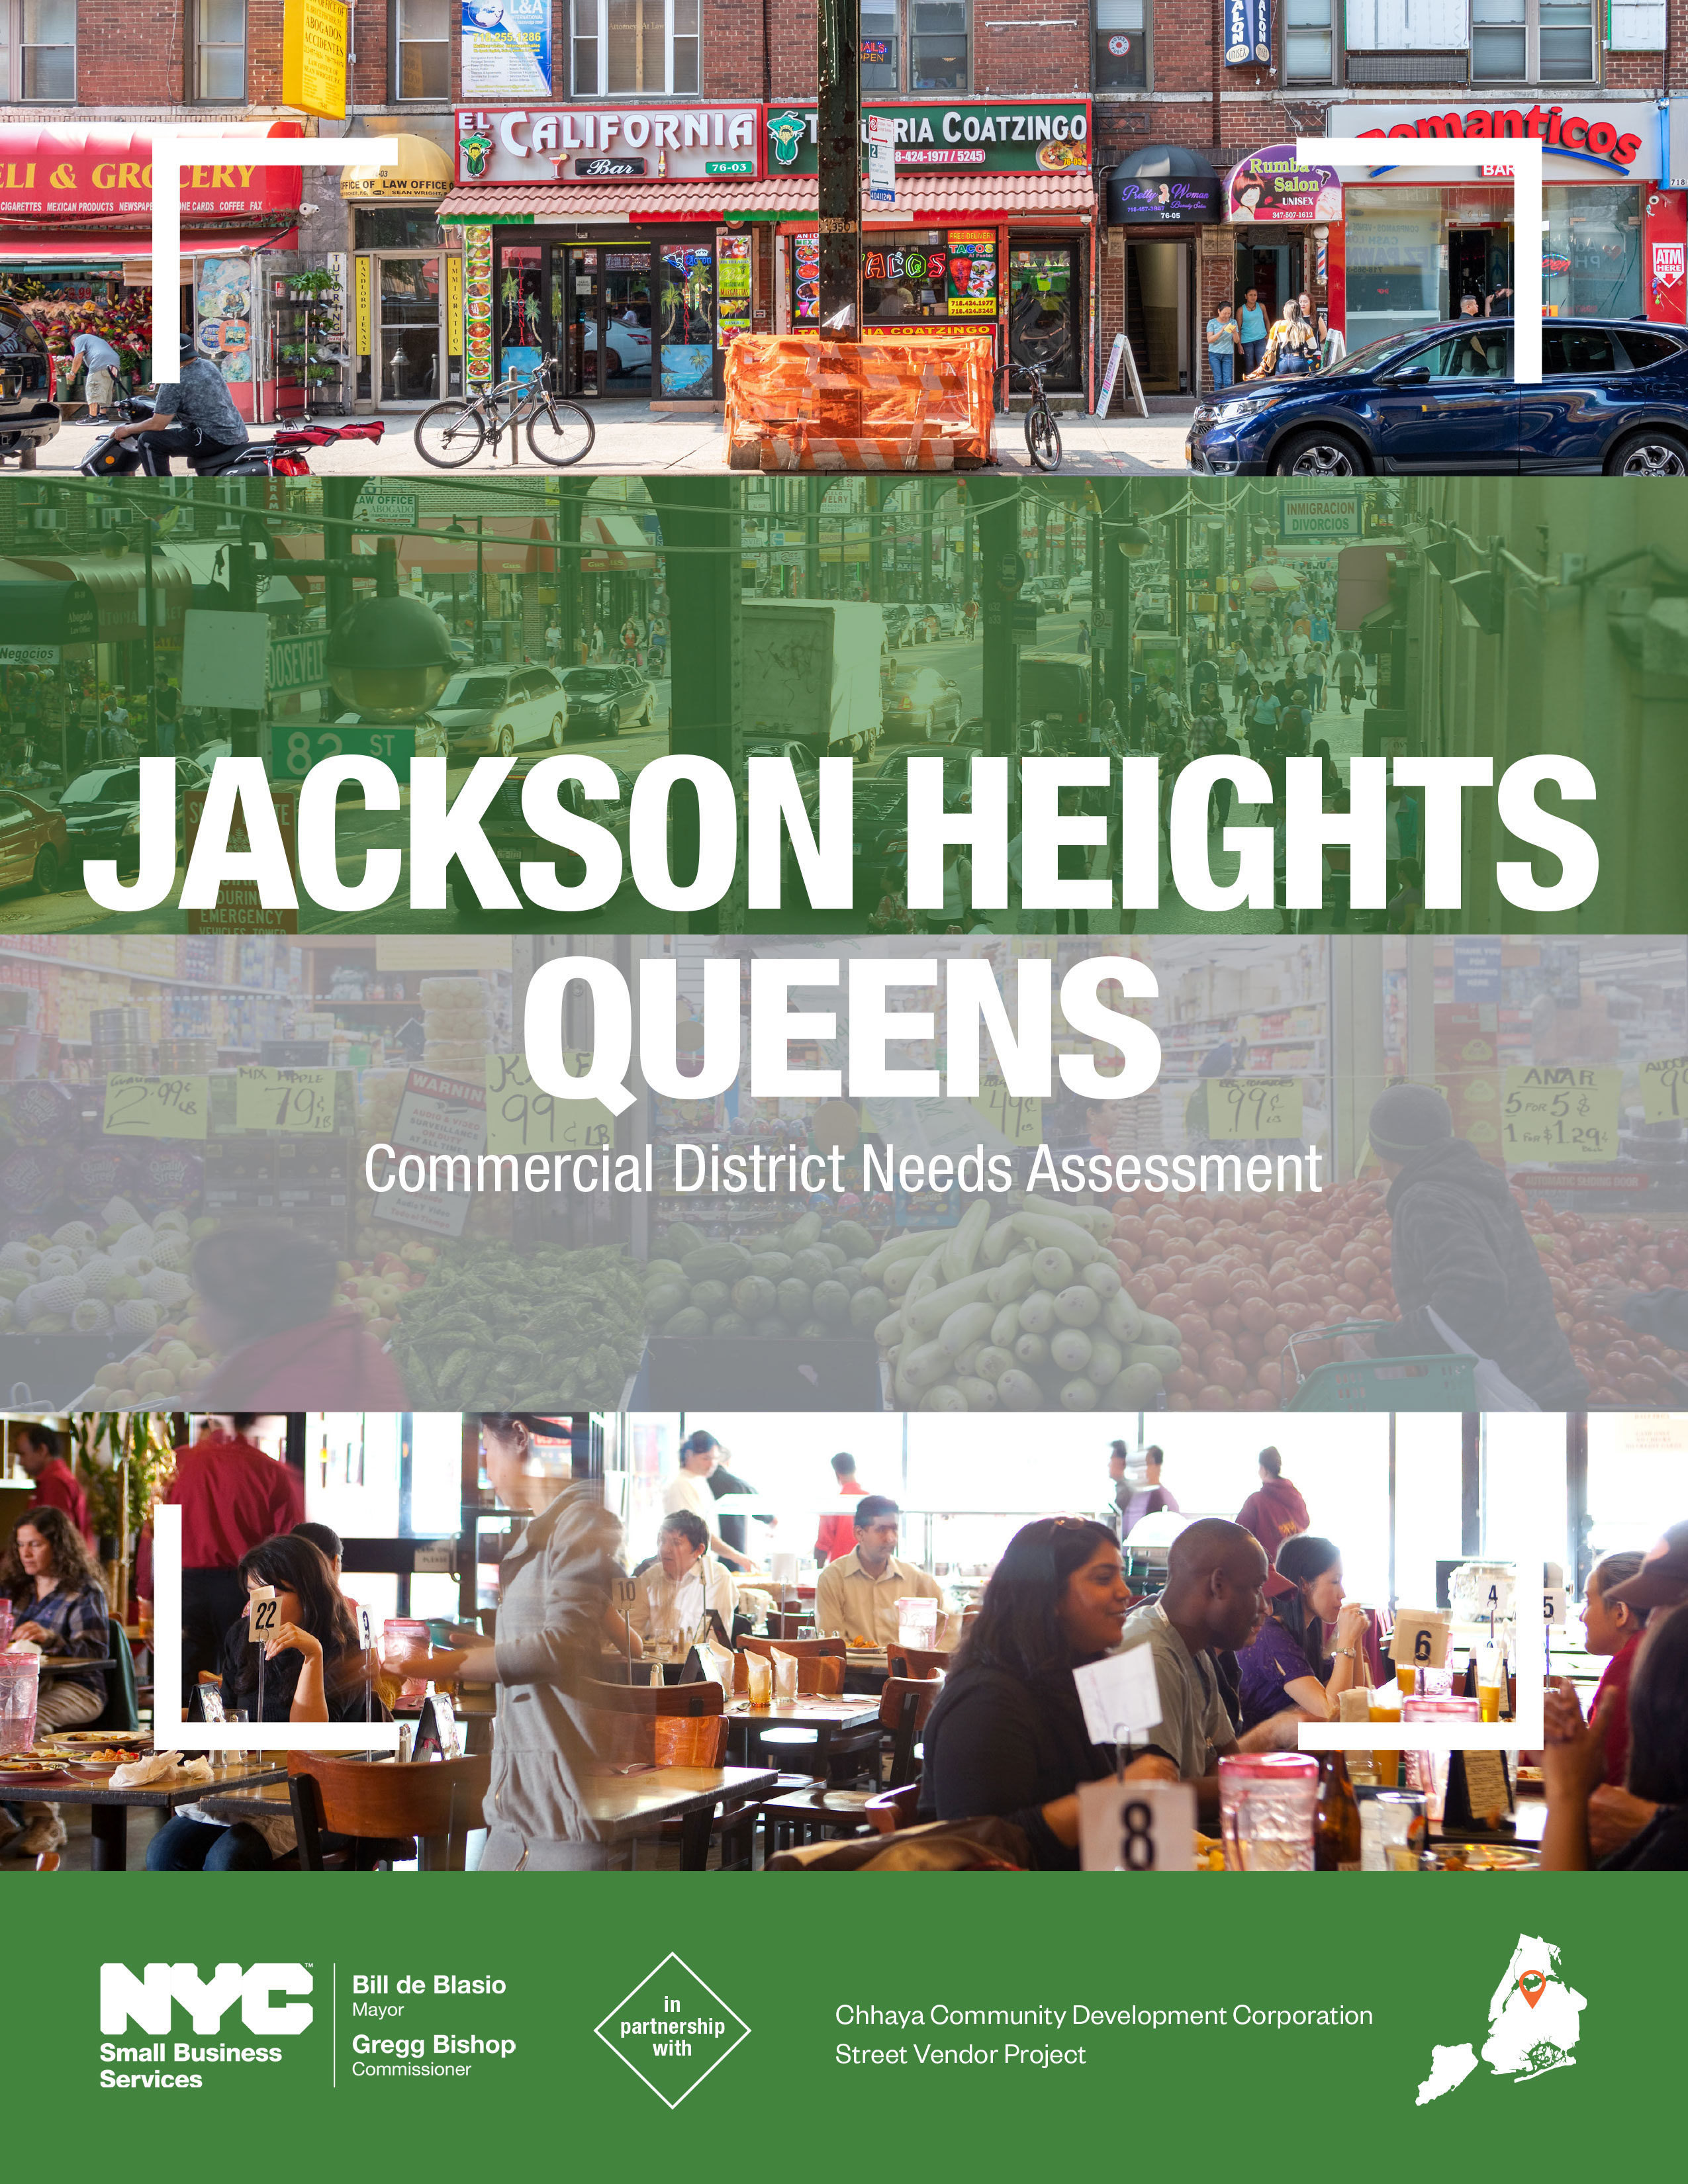 Jackson Heights Commercial District Needs Assessment